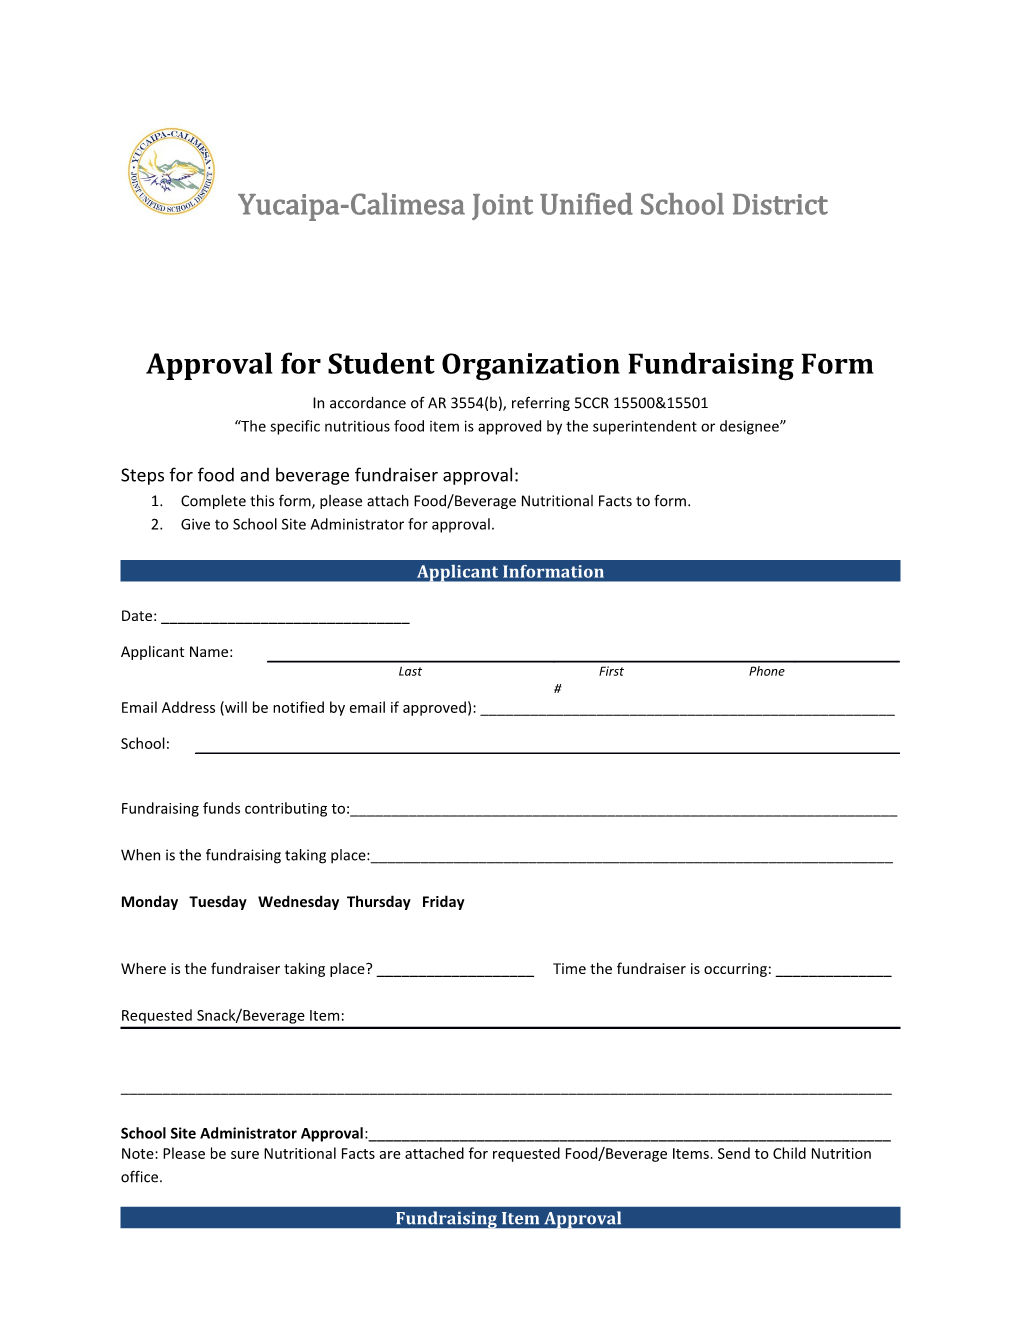 Approval for Student Organization Fundraising Form